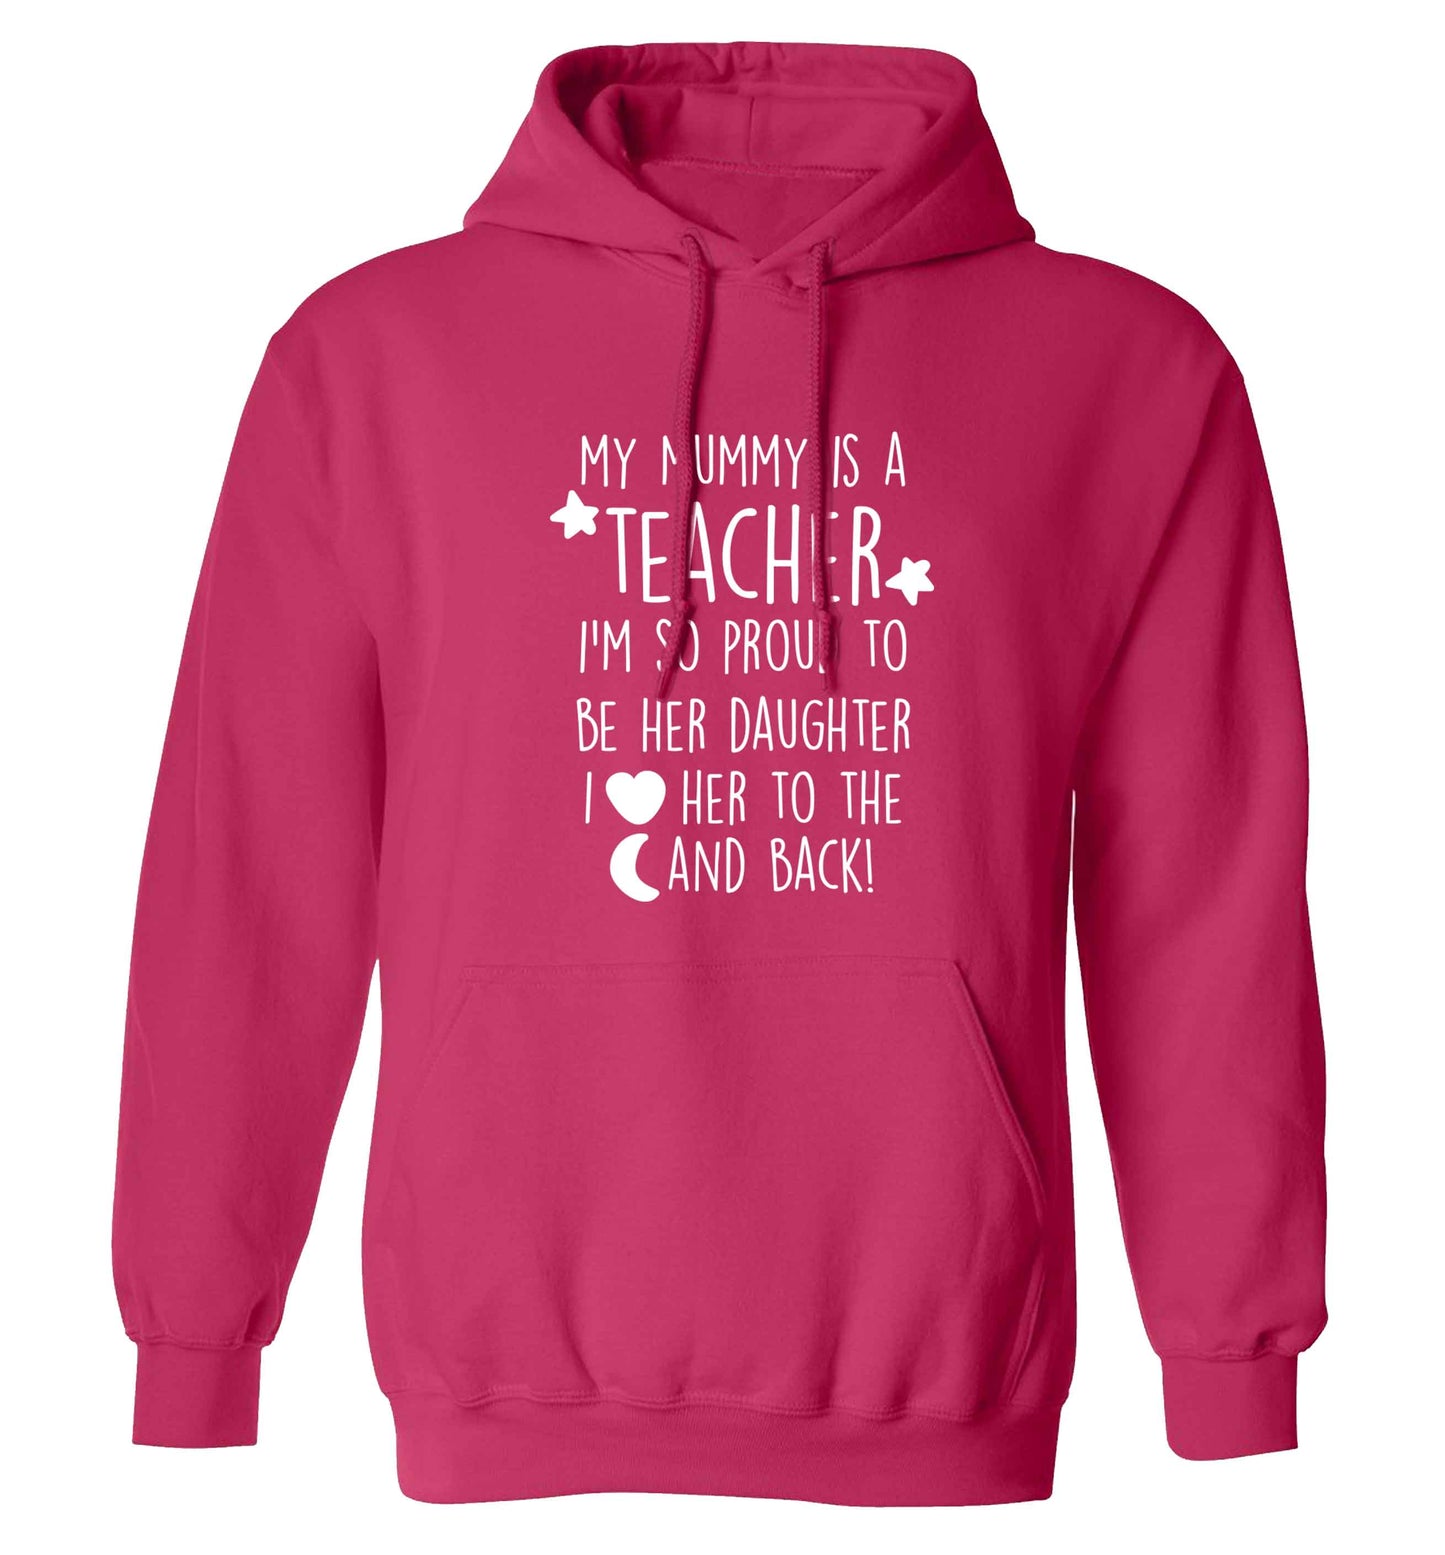 My mummy is a teacher I'm so proud to be her daughter I love her to the moon and back adults unisex pink hoodie 2XL